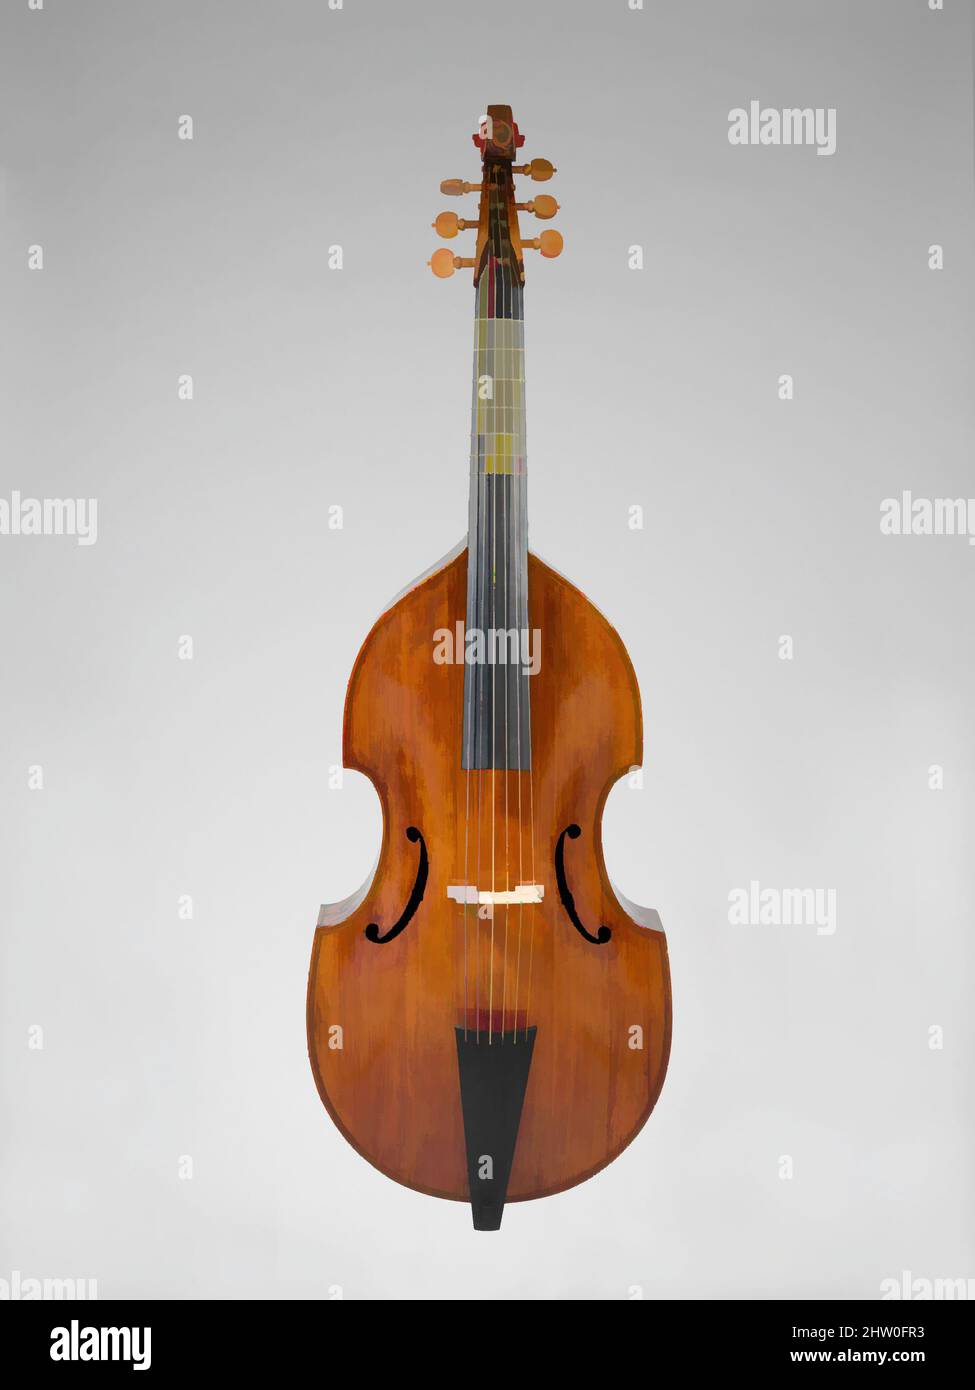 Art inspired by Bass Viola da Gamba, ca. 1600, London?, England, United Kingdom, British, Wood, Total L.: 119.5 cm (47-1/16 in.); Body L.: 71.5 cm (28-3/16 in.); Body W.: upper 32 cm (12-1/2 in.), middle 23.4 cm (9-3/16 in.), lower 39 cm (15-1/8 in.); Rib H.: upper 9 cm (3-5/8 in, Classic works modernized by Artotop with a splash of modernity. Shapes, color and value, eye-catching visual impact on art. Emotions through freedom of artworks in a contemporary way. A timeless message pursuing a wildly creative new direction. Artists turning to the digital medium and creating the Artotop NFT Stock Photo